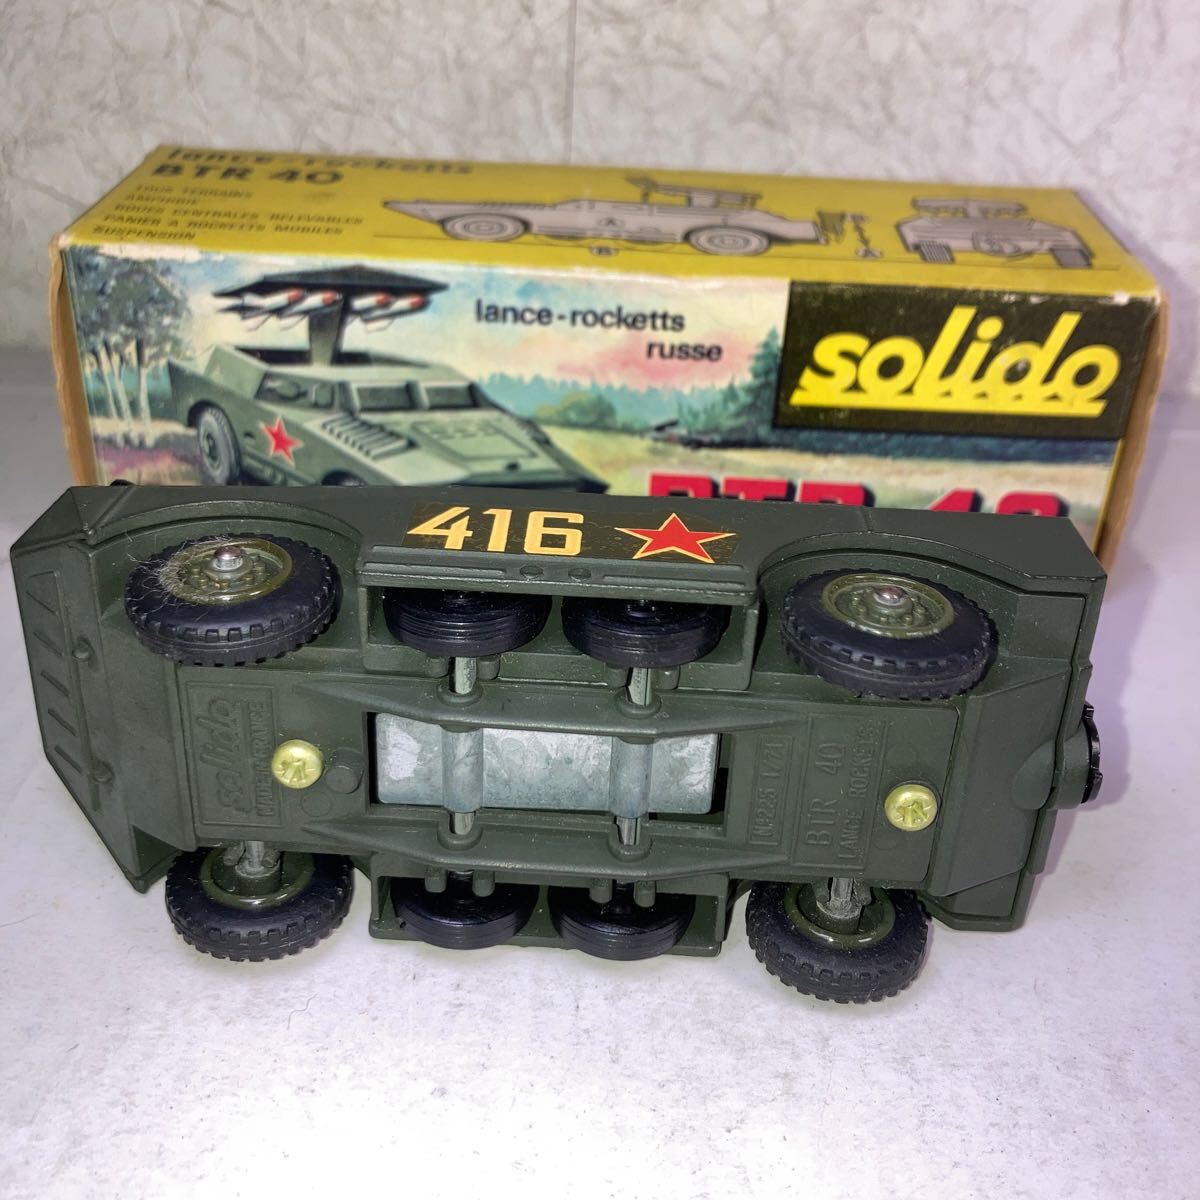  prompt decision at that time Solido France made solido 225 lance rocketts BTR 40